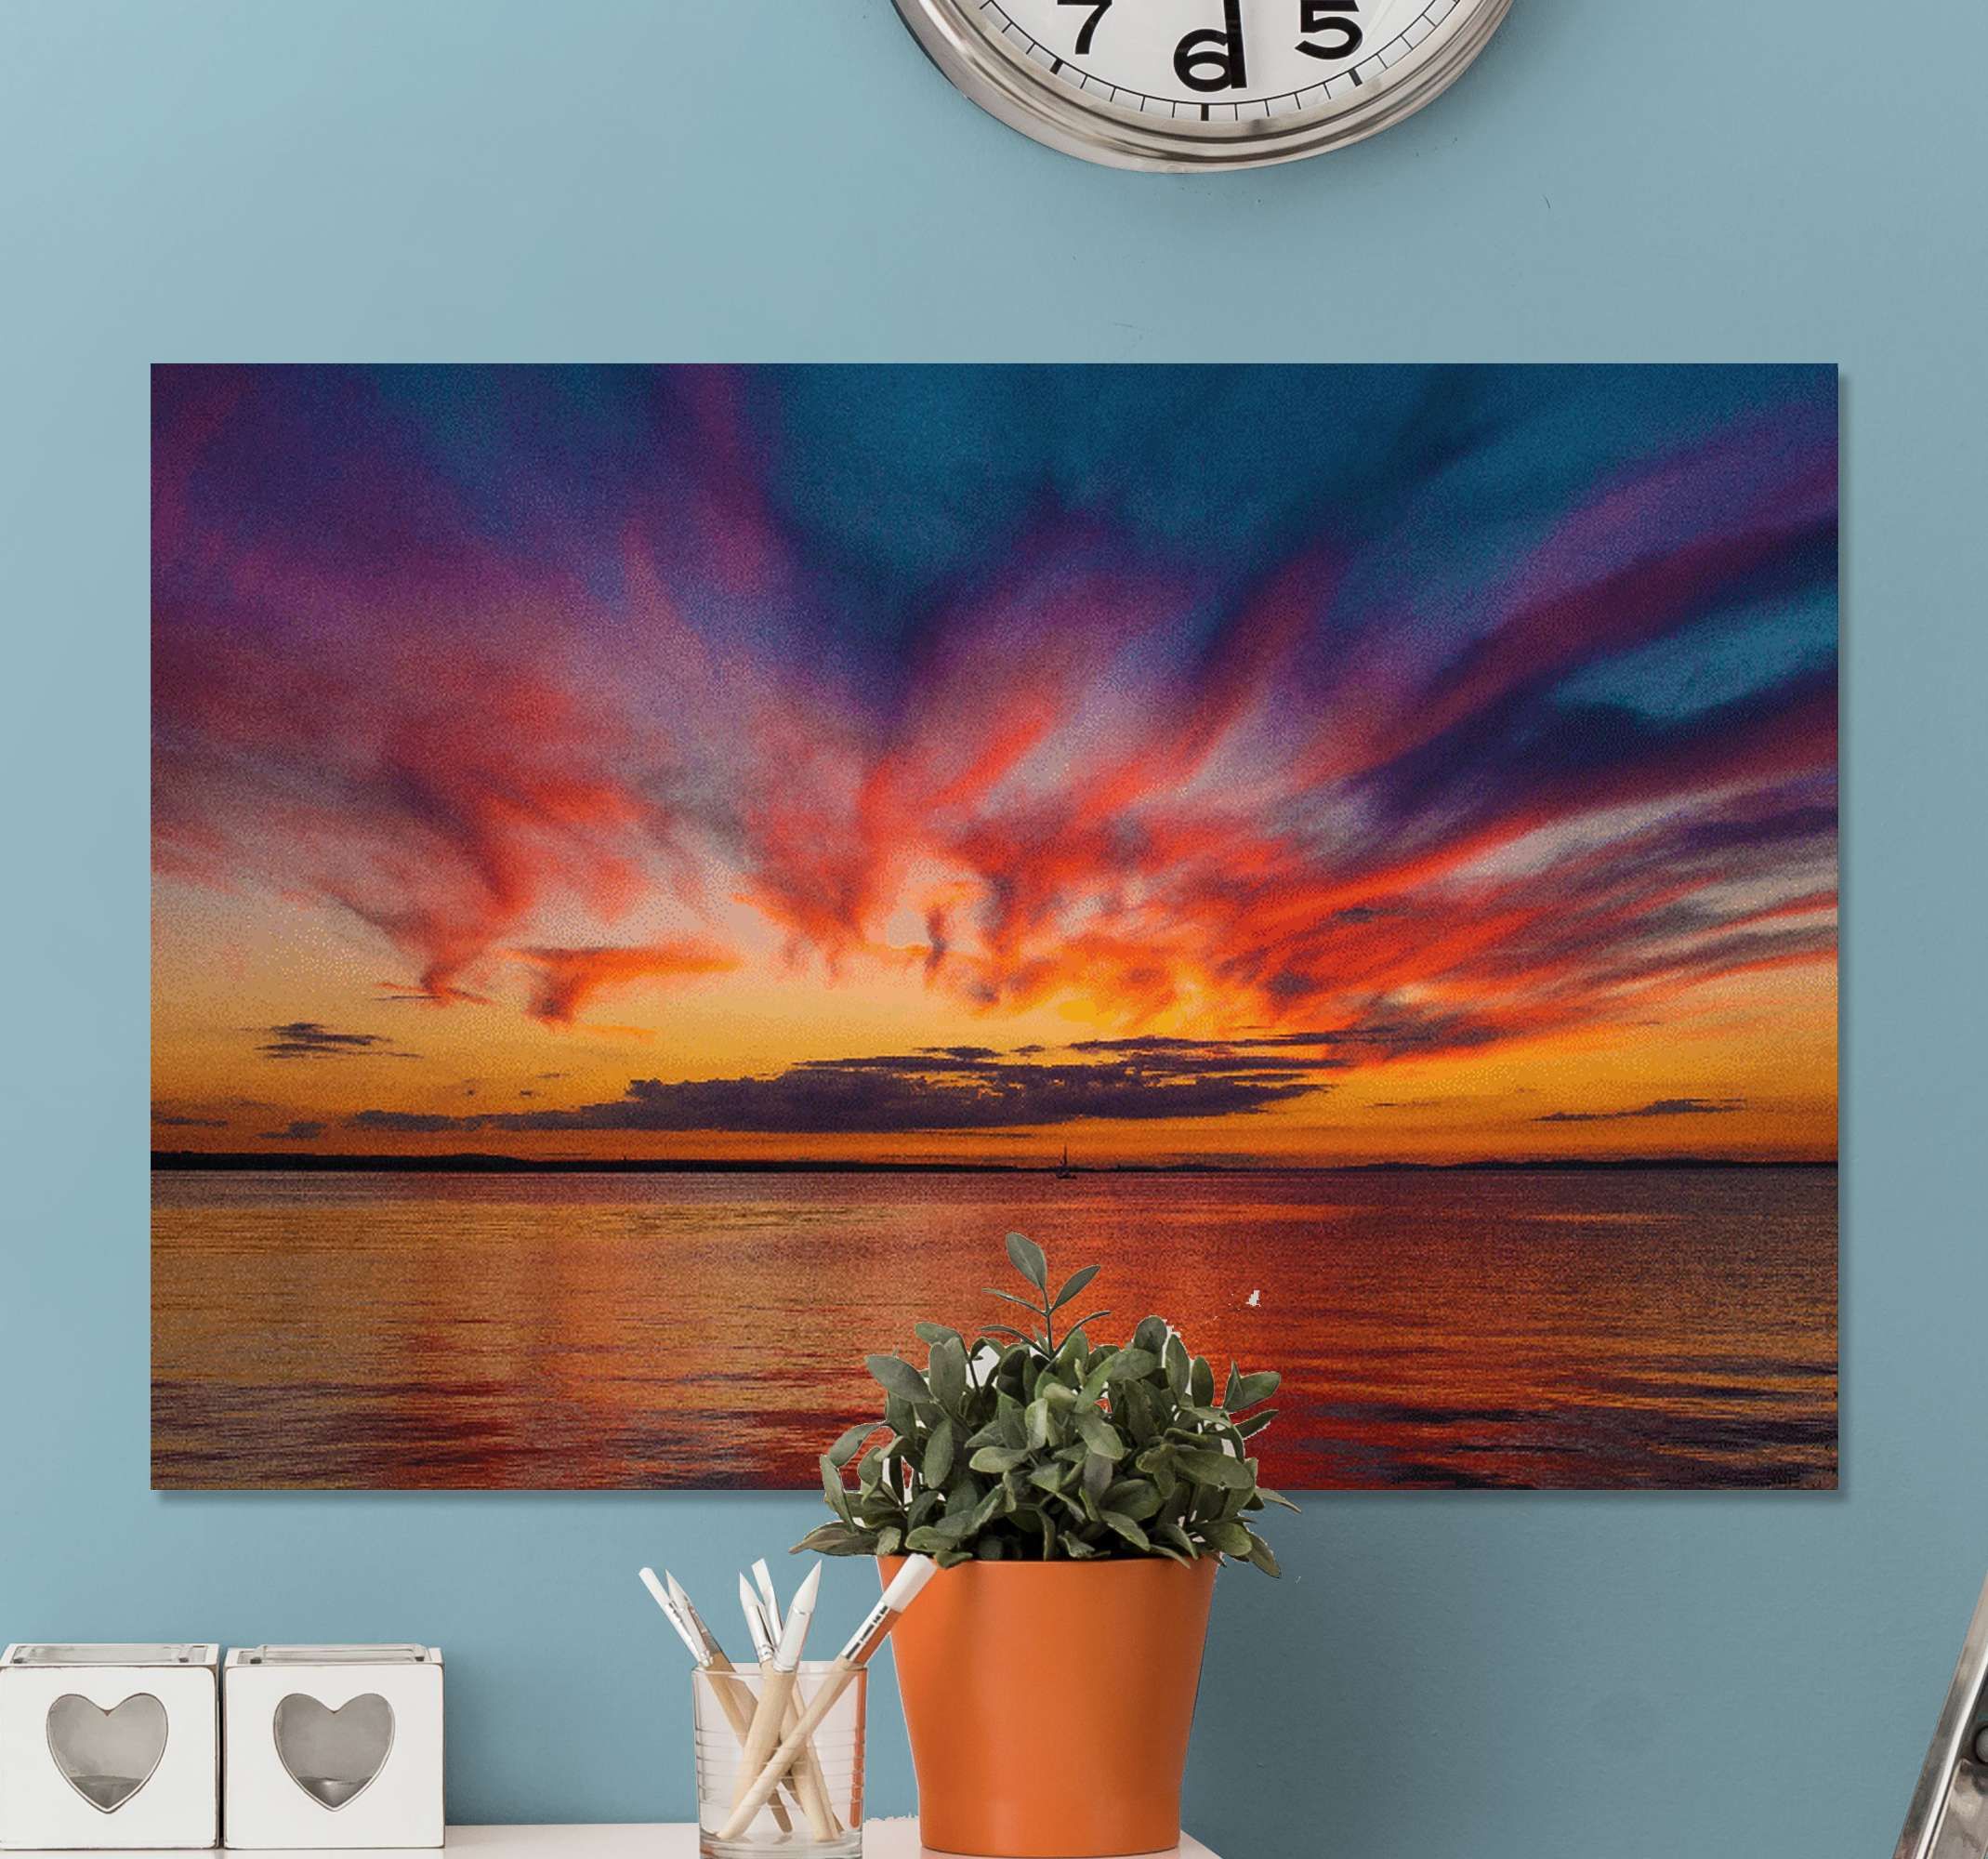 Sunset At The Sea Landscape Wall Art – Tenstickers Throughout Sunset Landscape Wall Art (View 4 of 15)